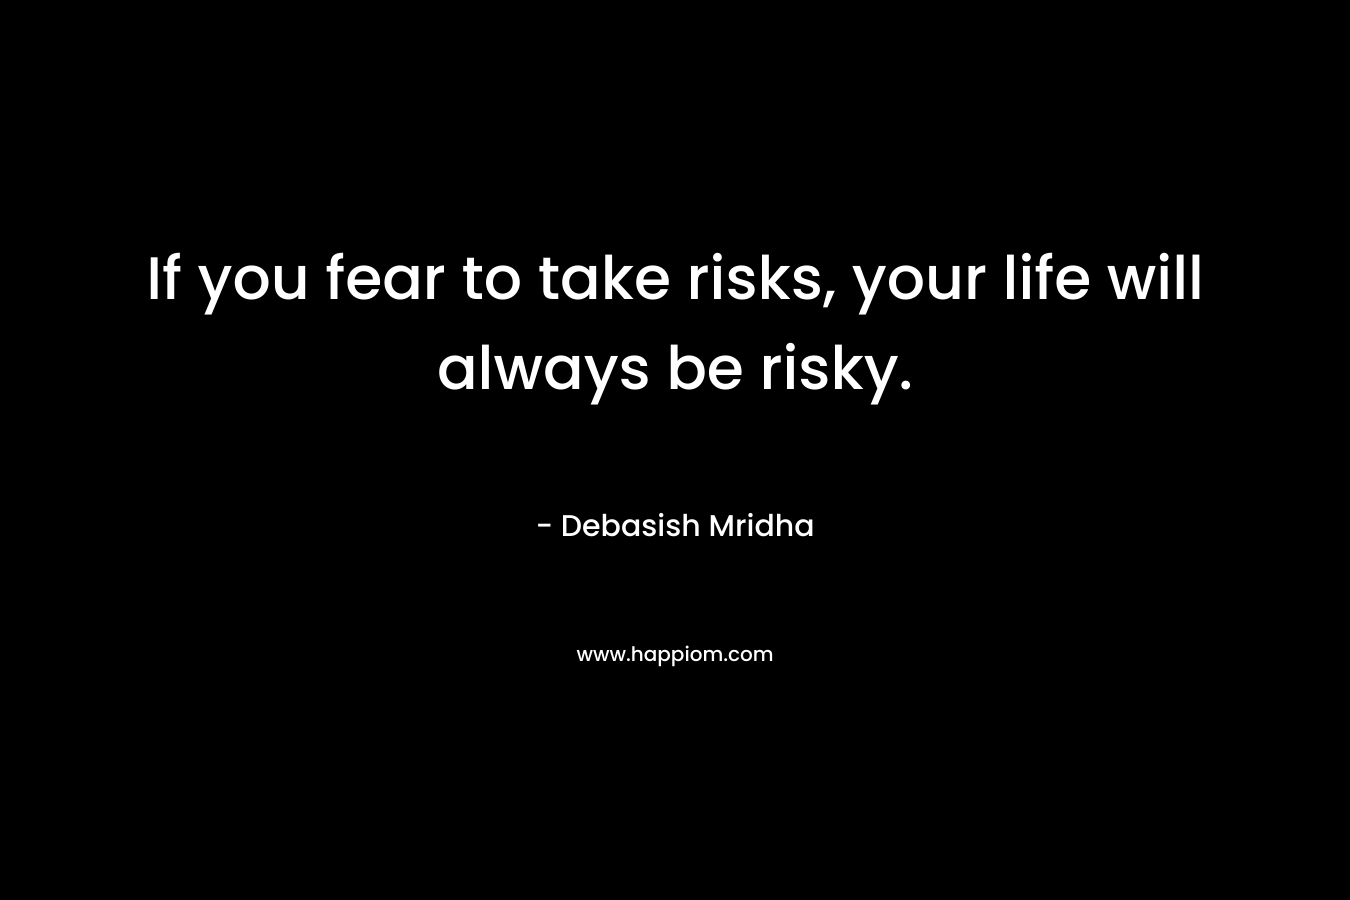 If you fear to take risks, your life will always be risky. – Debasish Mridha